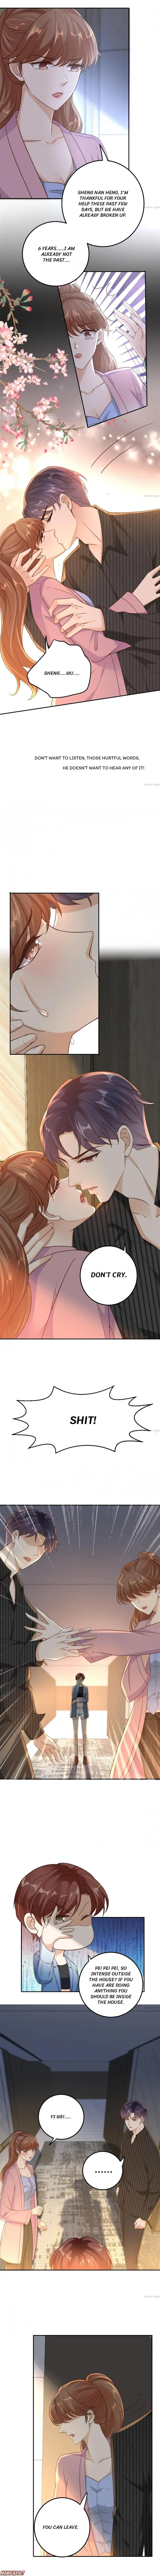 Breakup Loading 99% Chapter 24 - Page 1